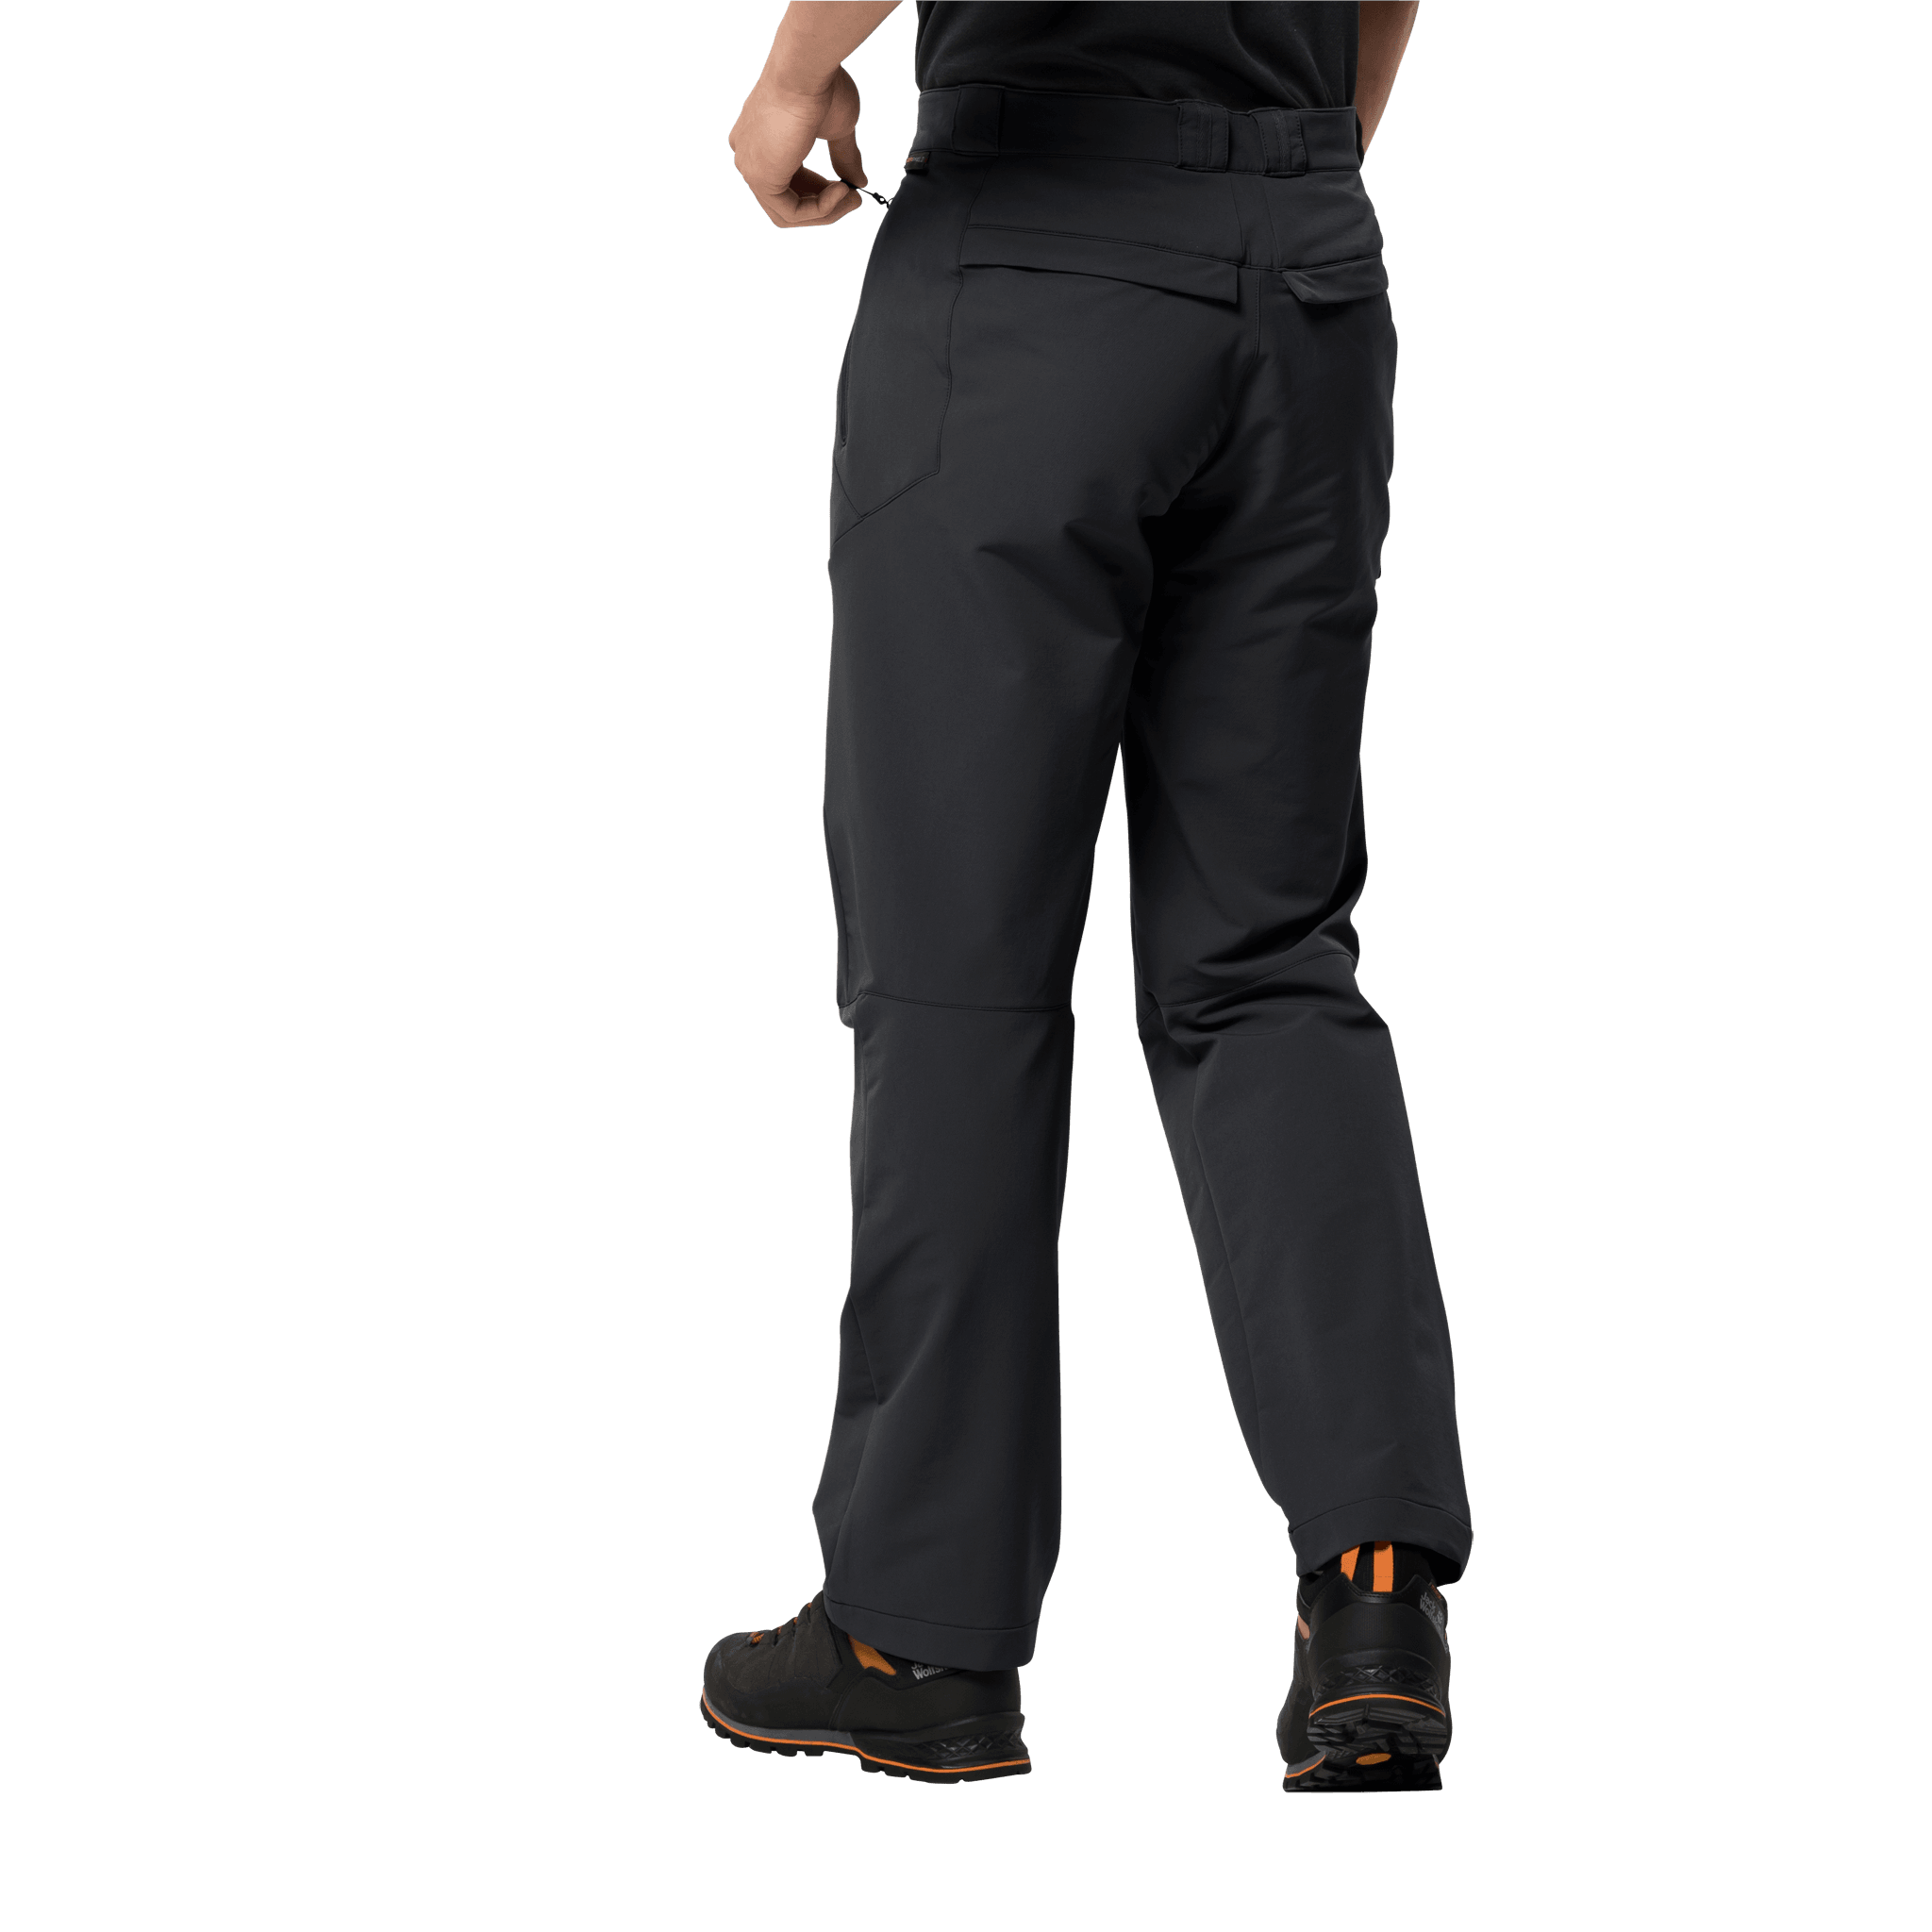 Men's Activate Thermic Winter Hiking Pants | Jack Wolfskin